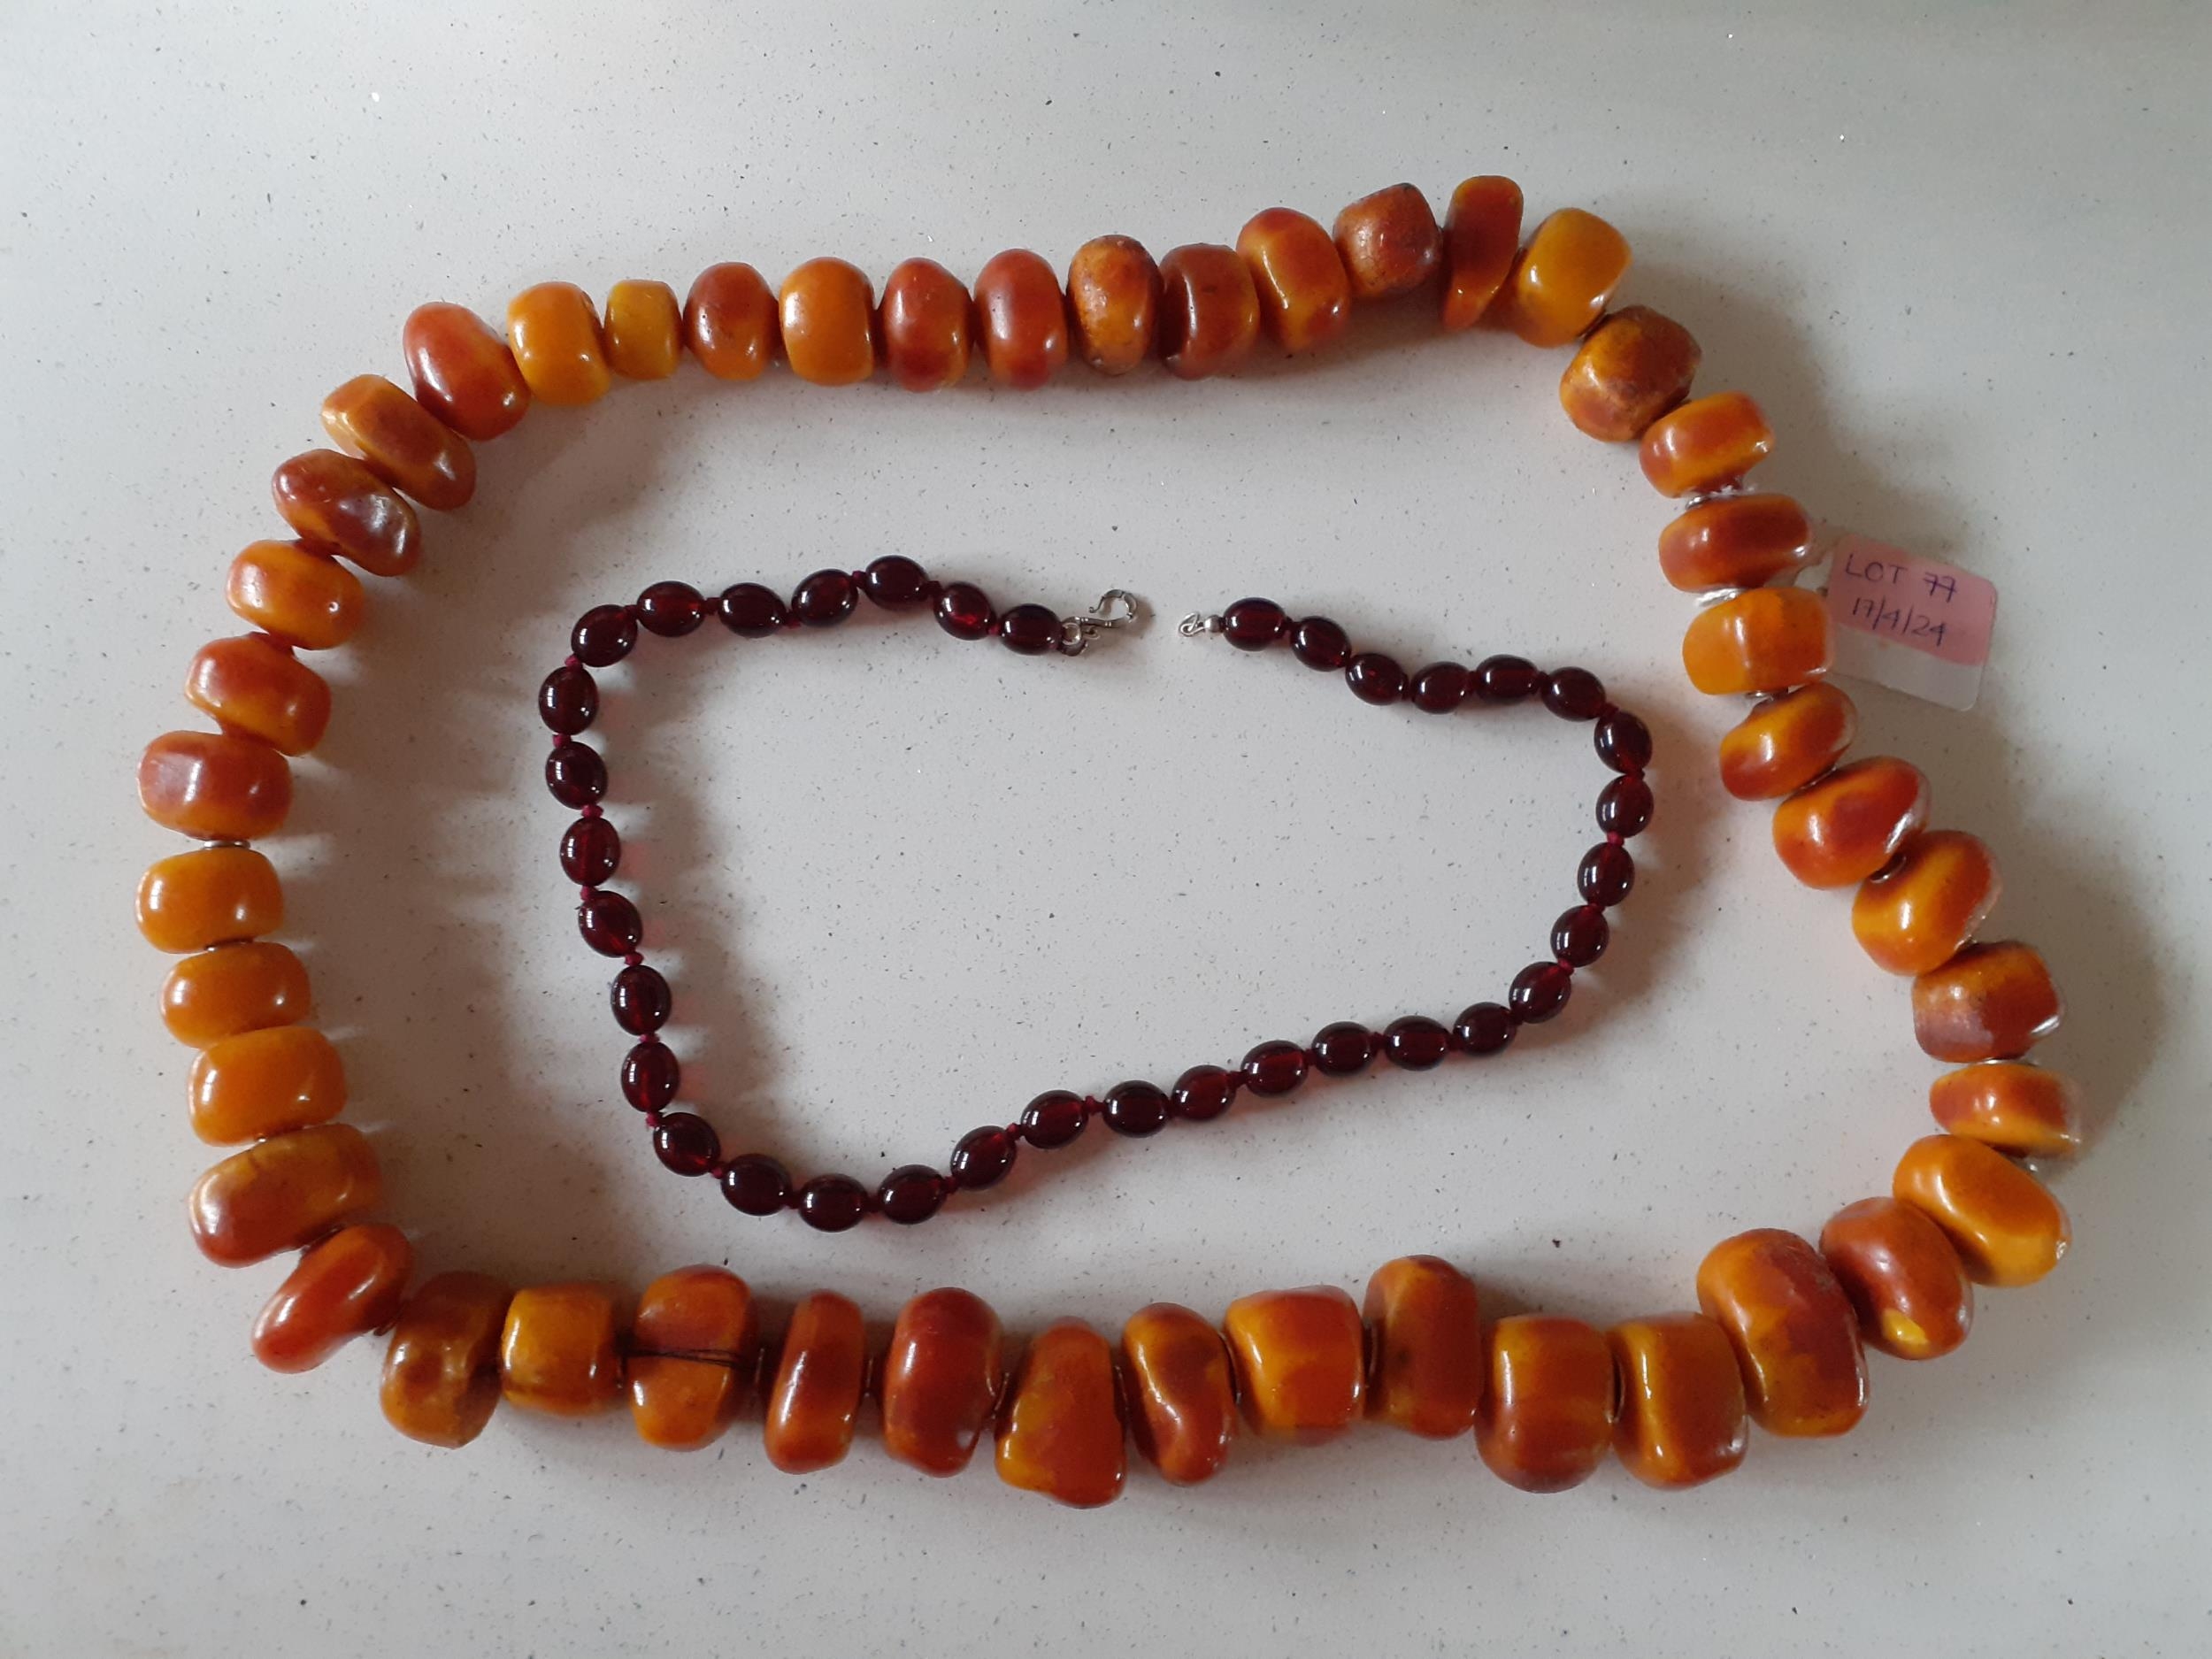 Two vintage resin necklaces in the amber style, the cherry amber style weighs 41.3g and the larger